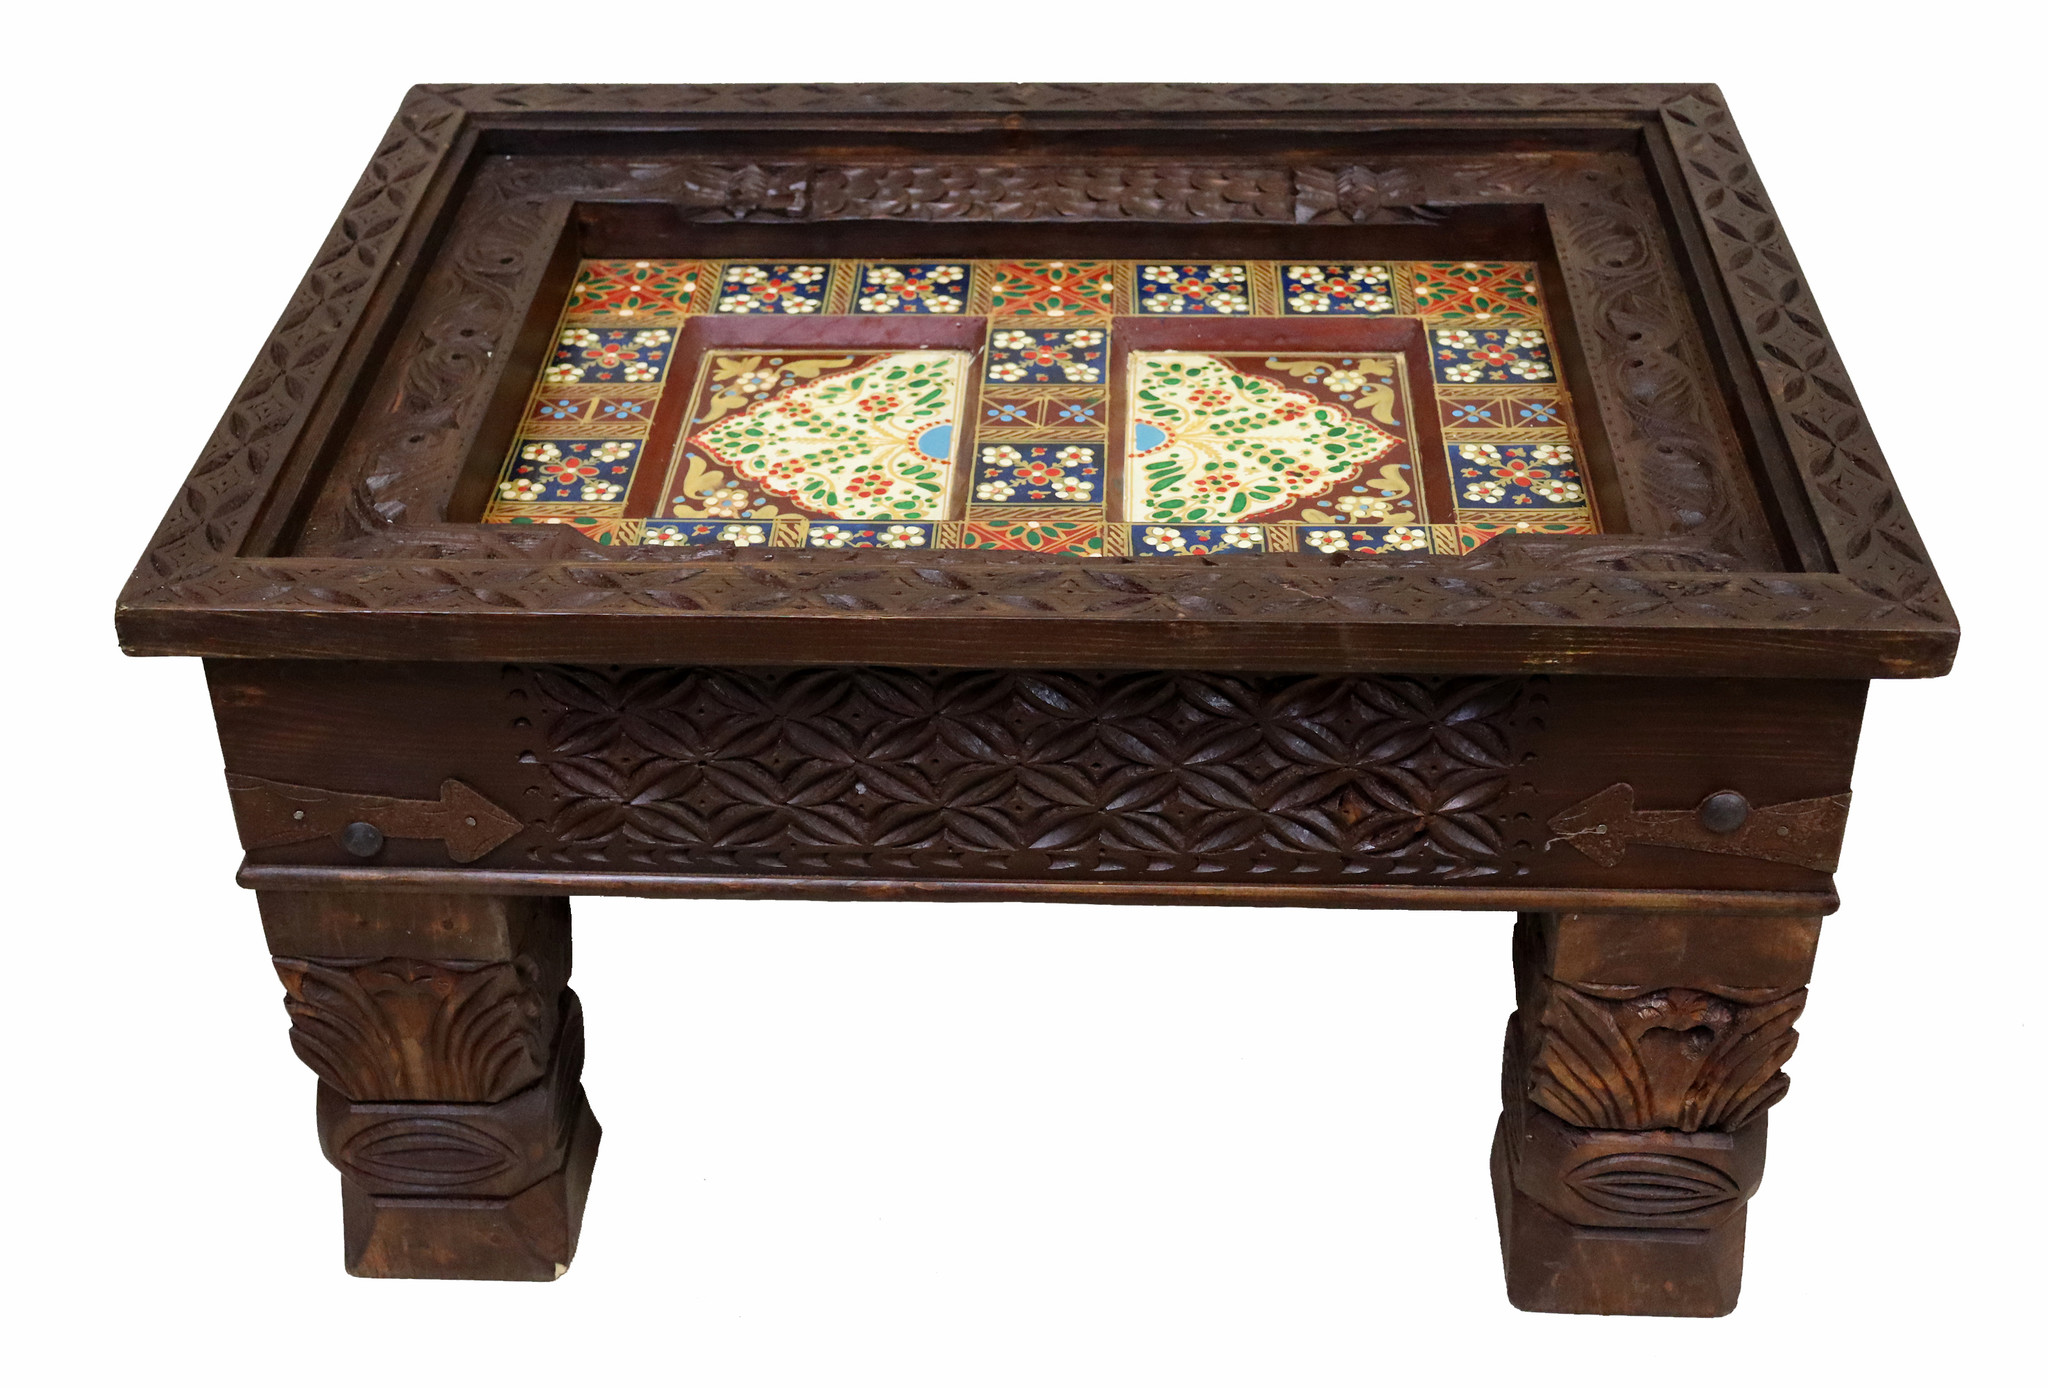 80x60 cm cm antique-look orient colonial solid wood hand-carved  table  Coffee Table   from Afghanistan nuristan 23-2